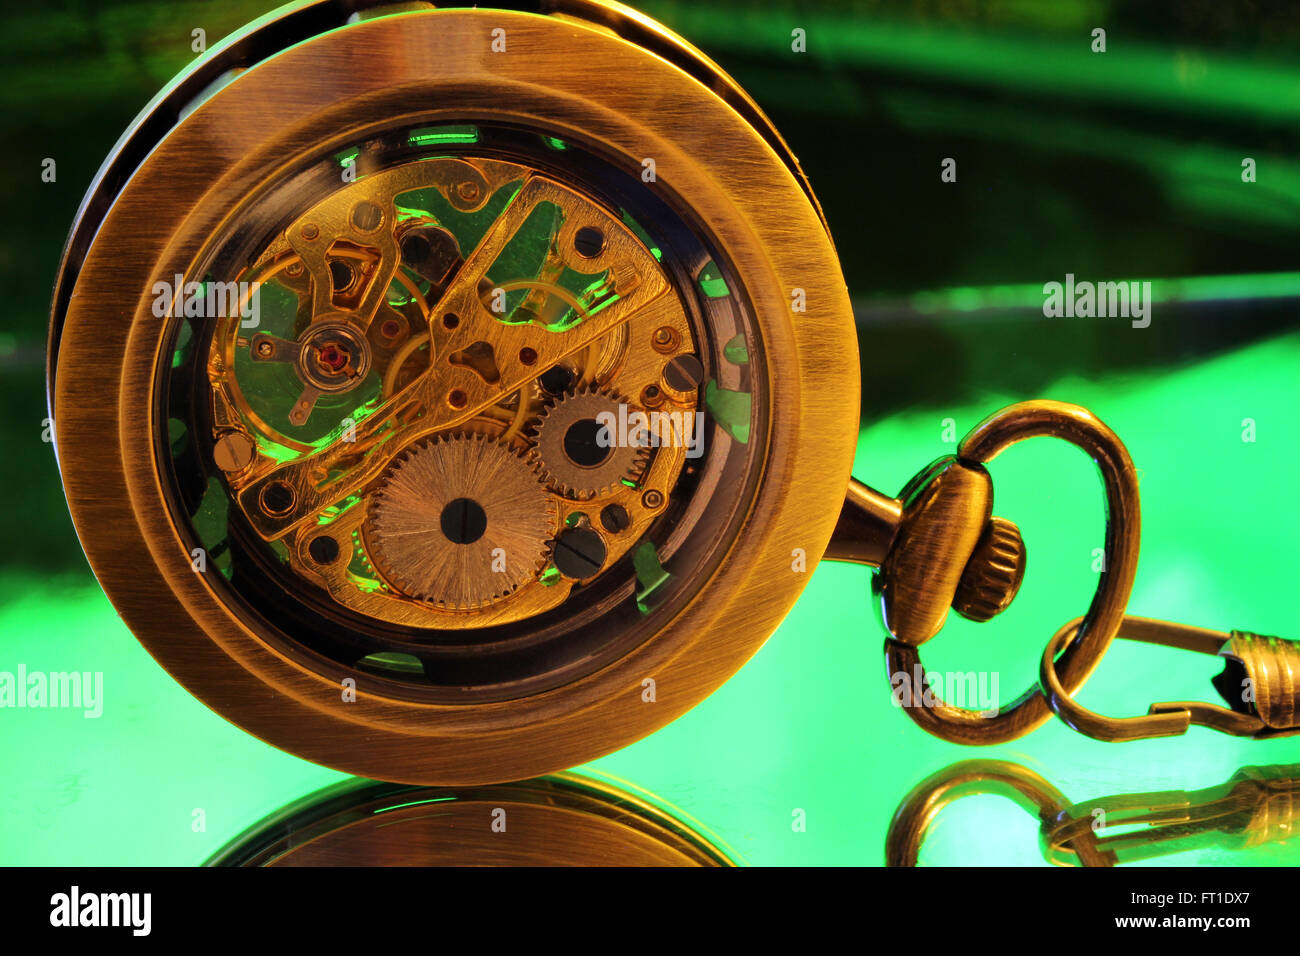 The inner gears of a pocket watch. Stock Photo